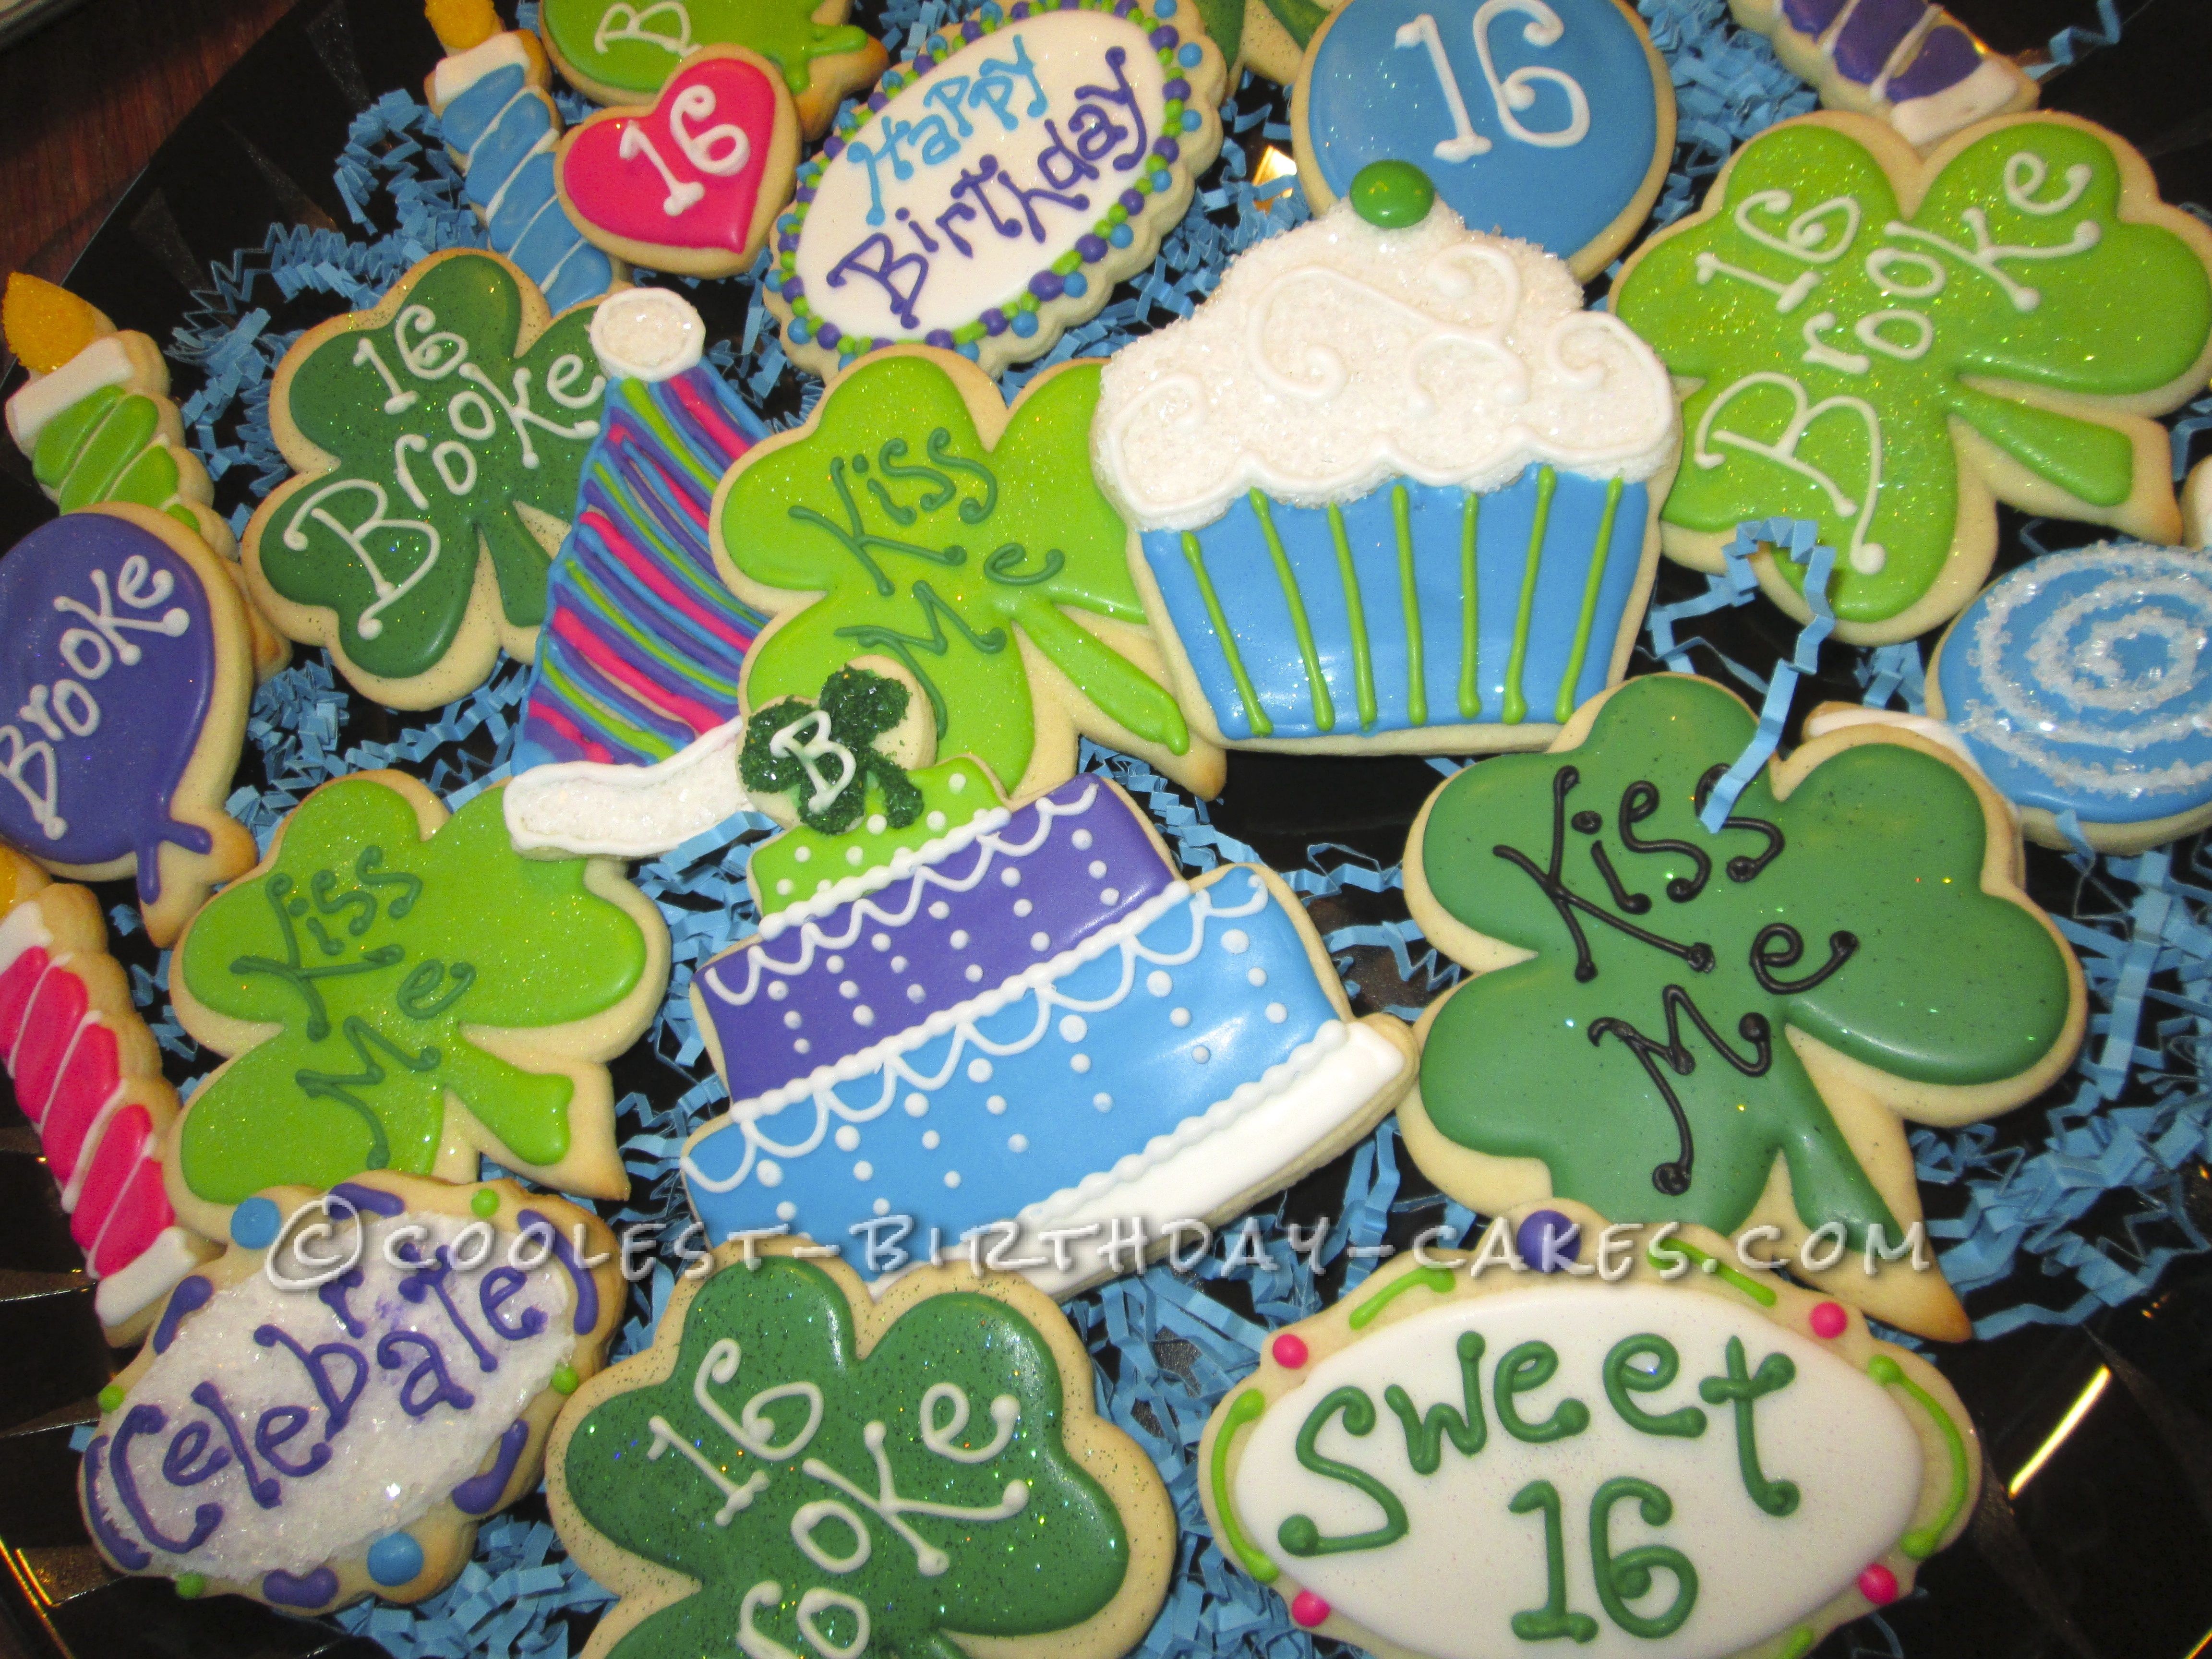 Who's Sweet 16 on St. Paddy's Day Cake